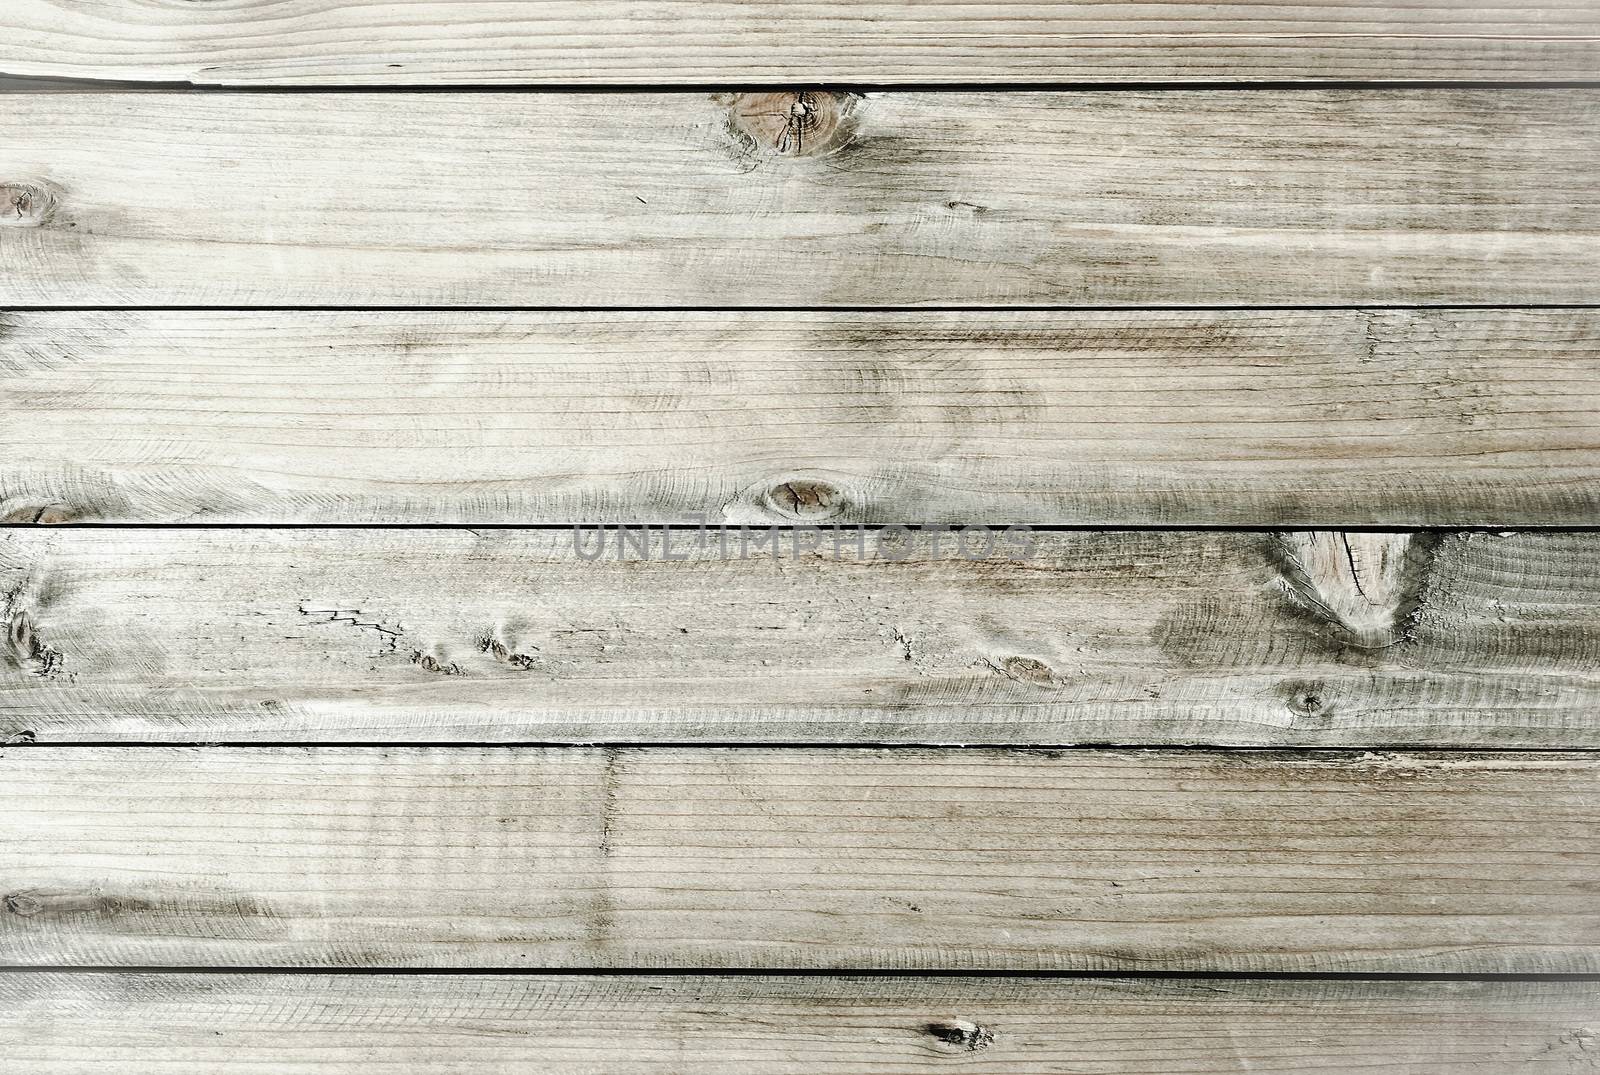 Wood texture background, wood planks. Grunge wood, painted wooden wall pattern. by titco